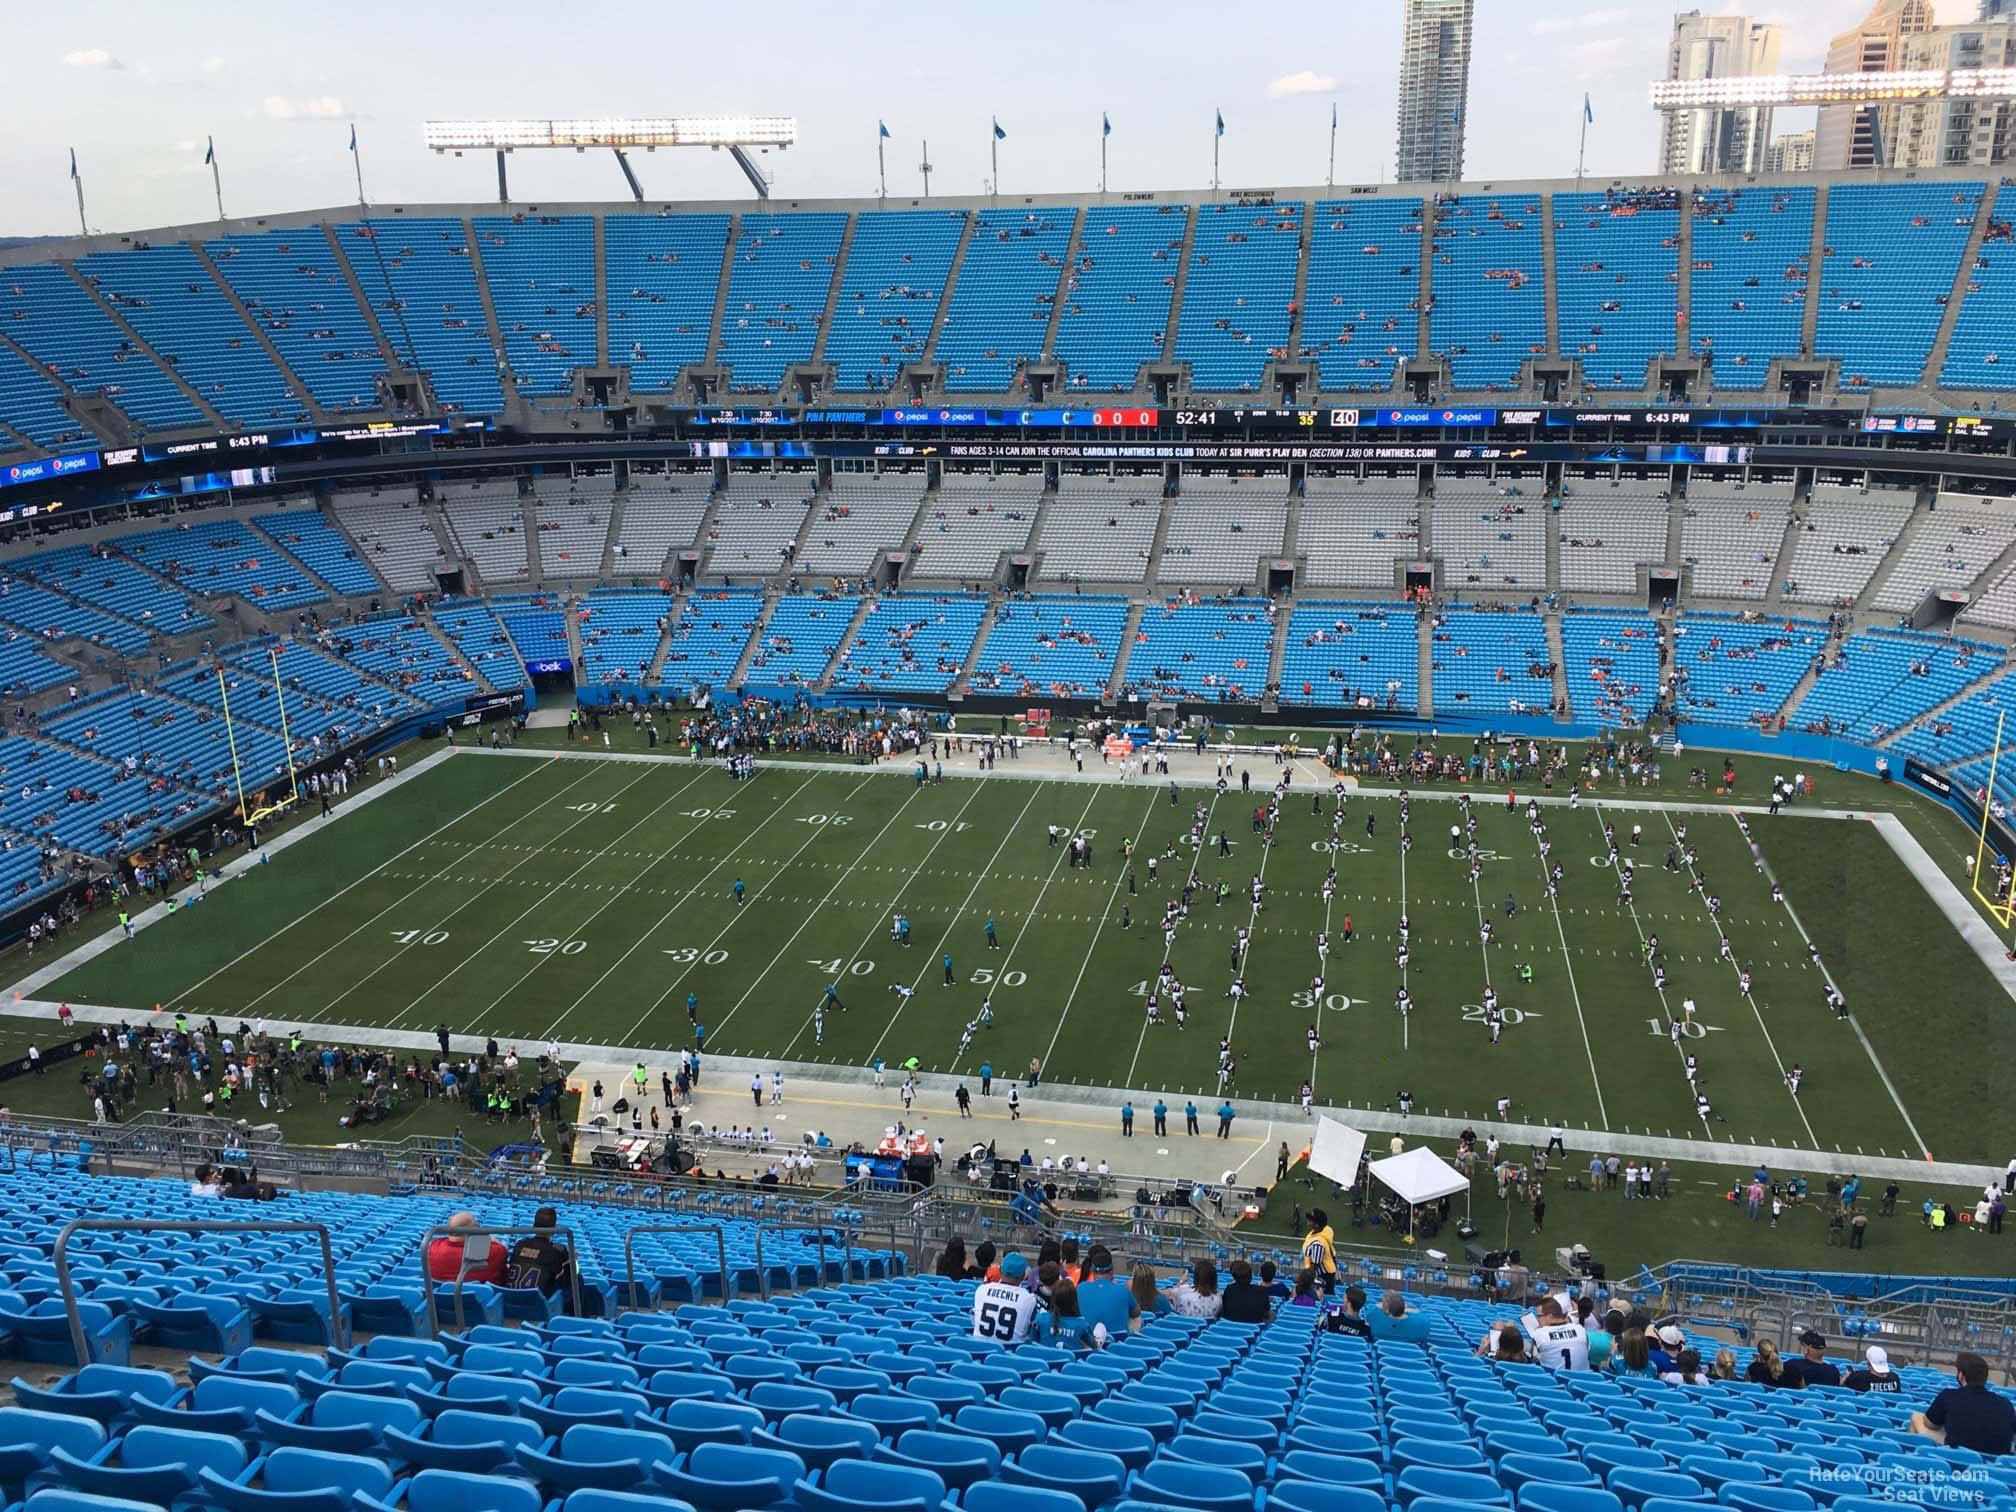 section 540, row 29 seat view  for football - bank of america stadium